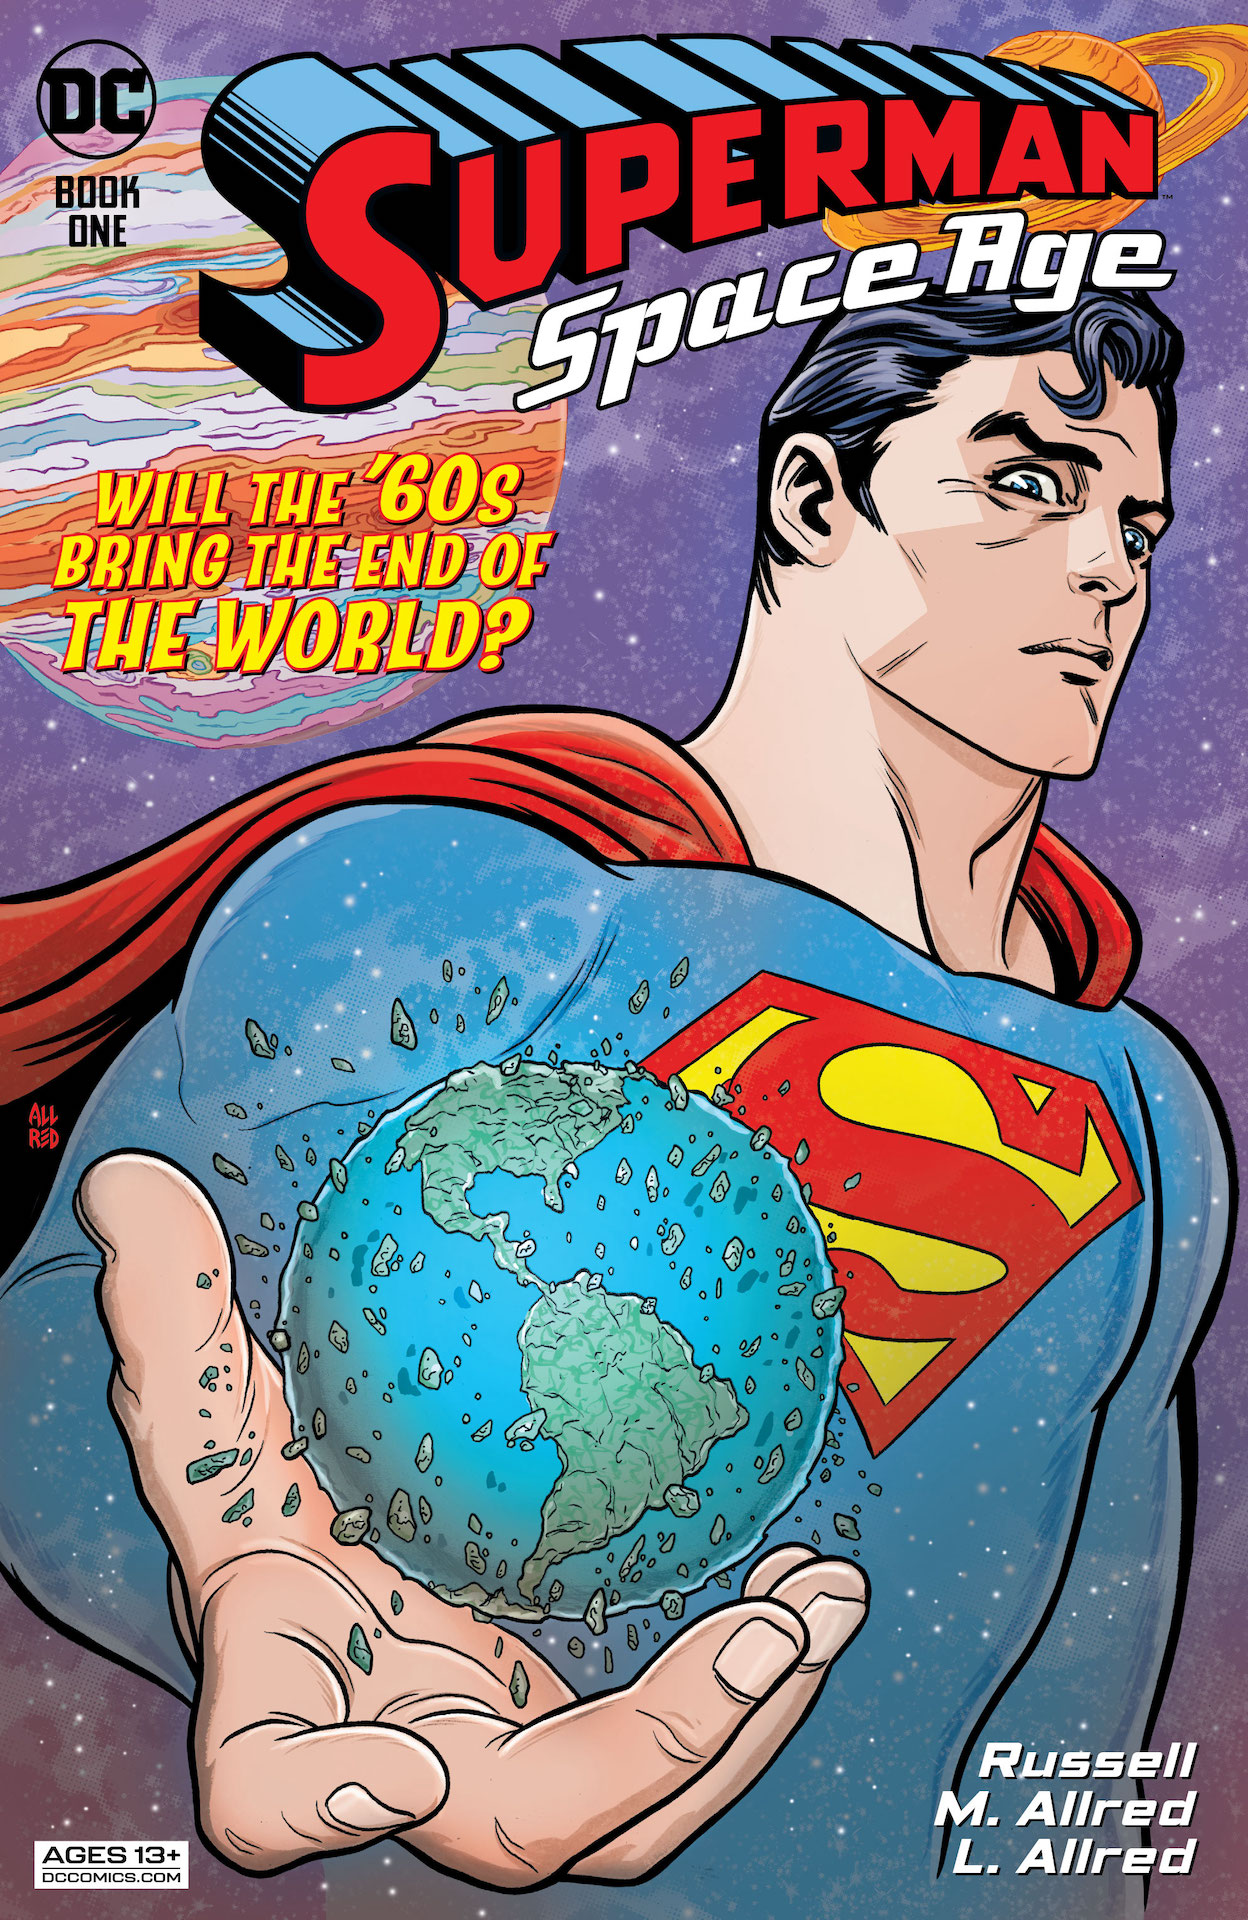 DC Preview: Superman: Space Age #1